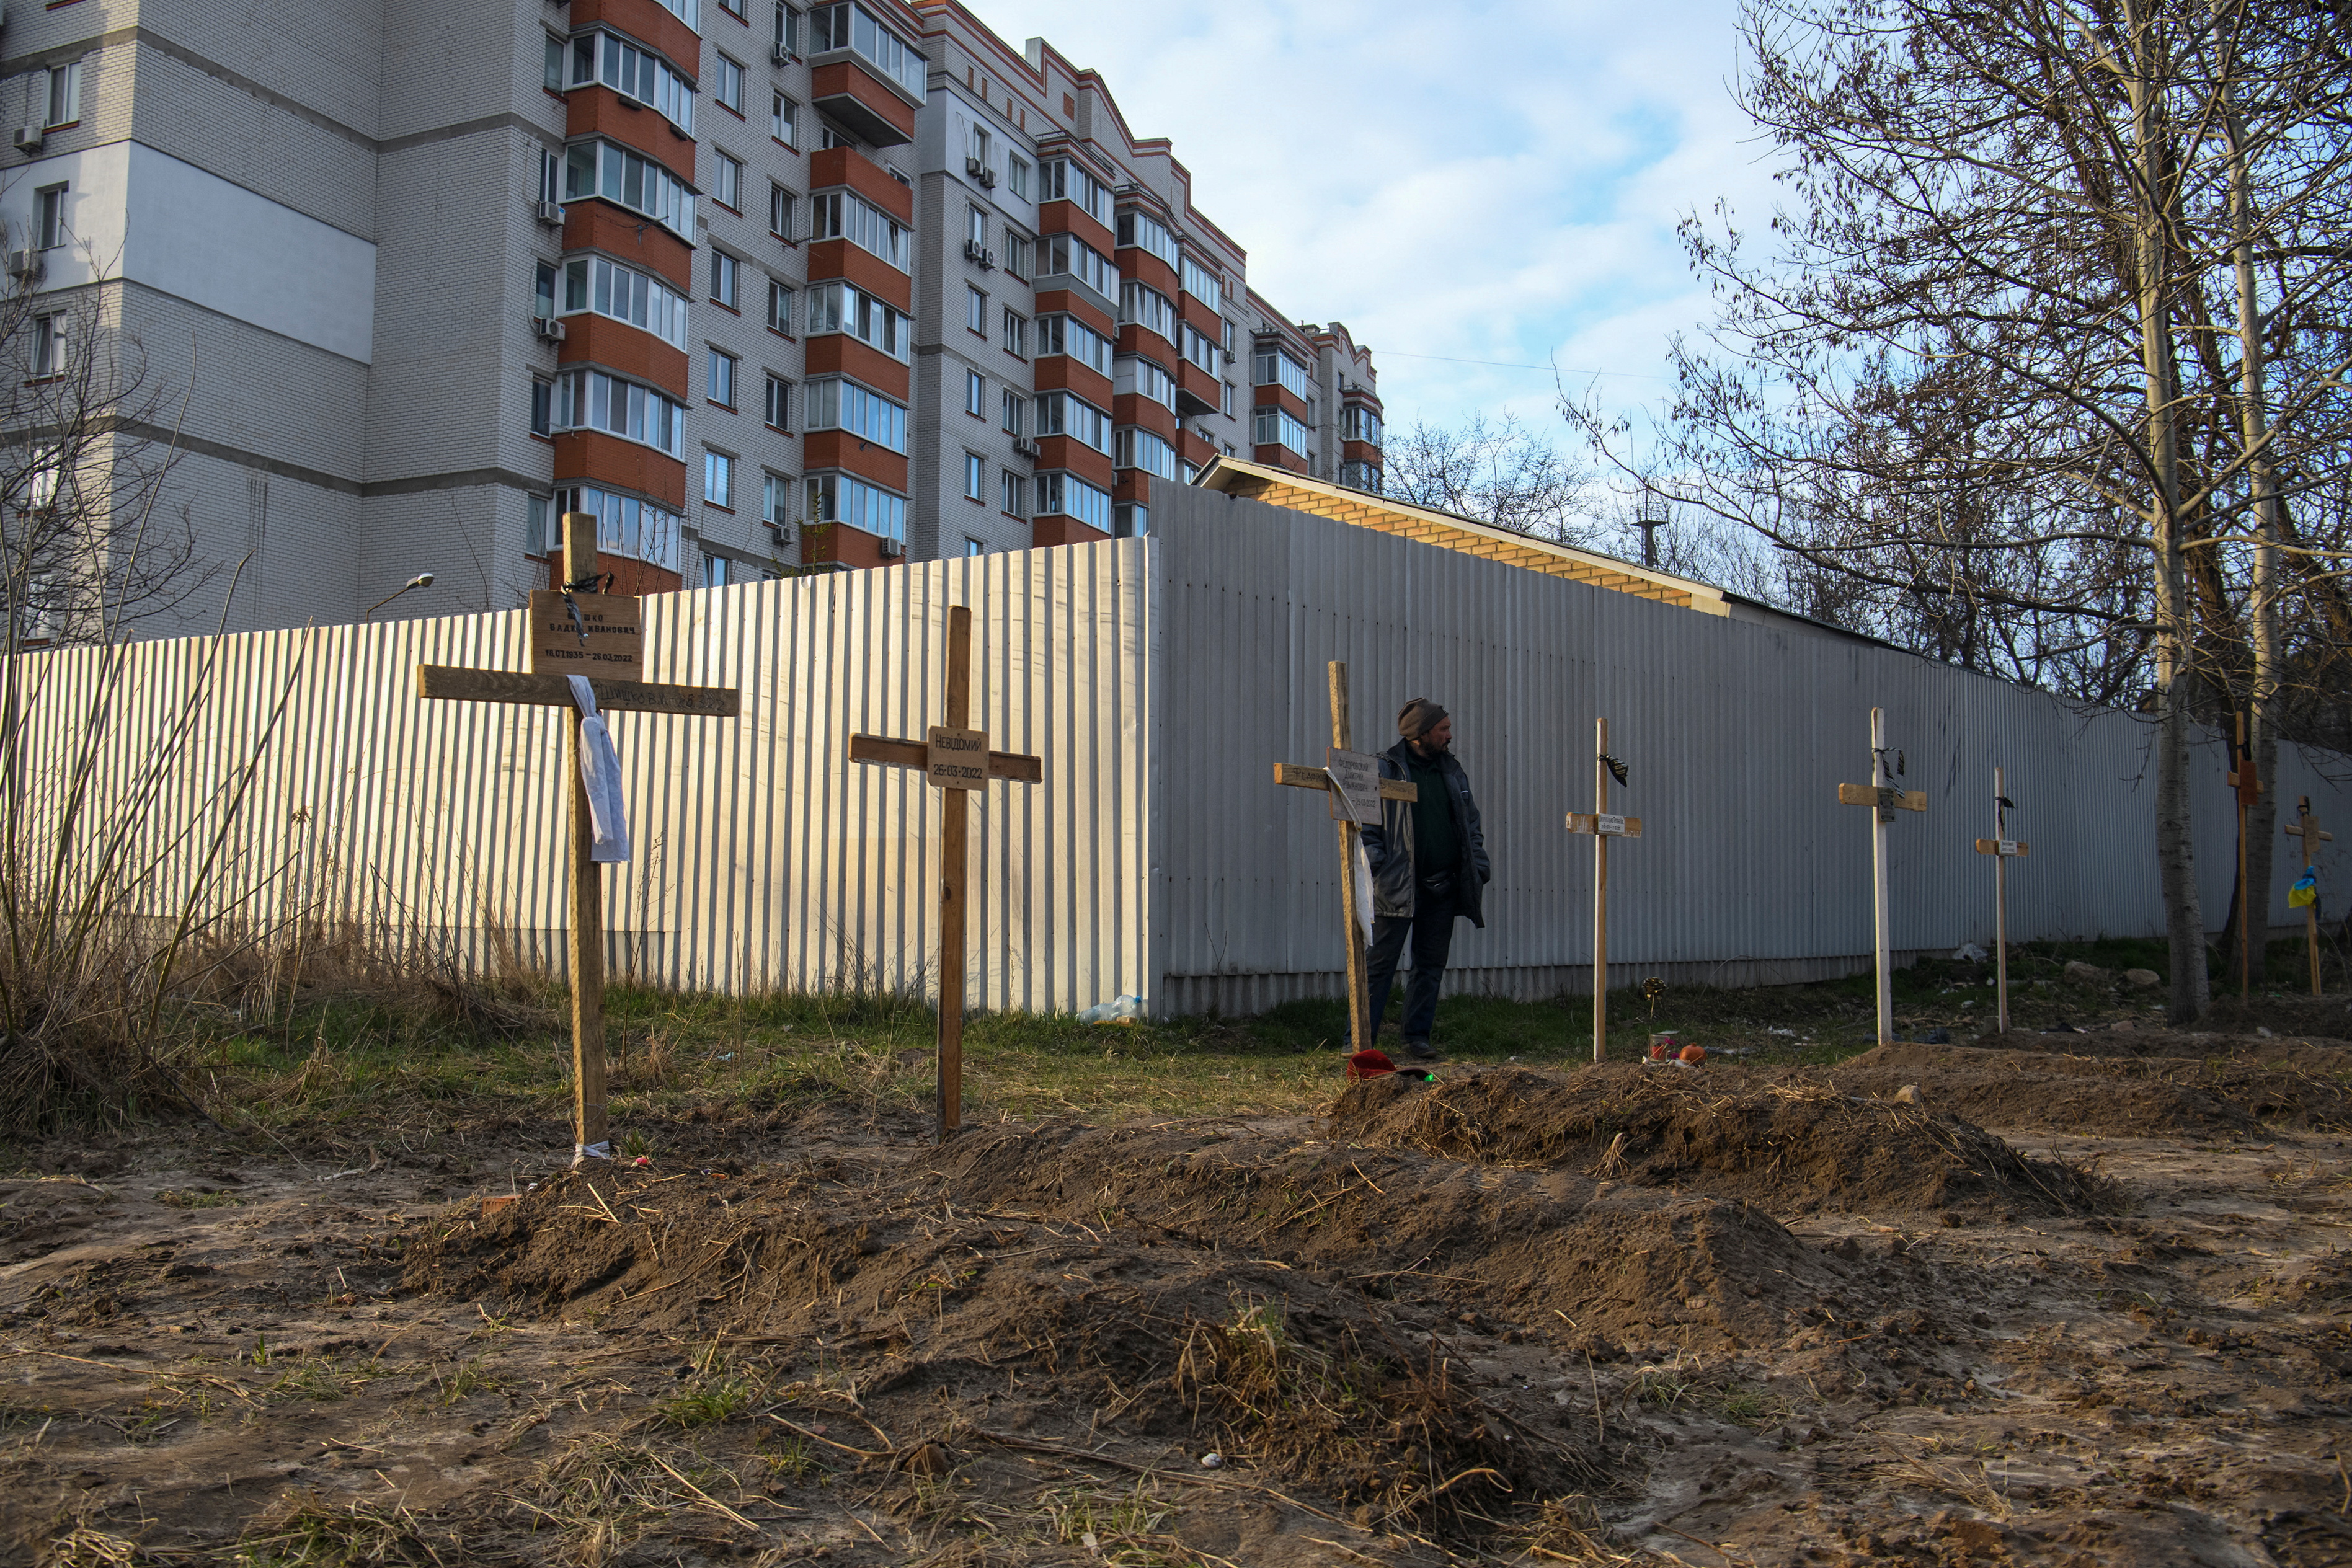 A man stands next to graves with bodies of civilians, who according to local residents were killed by Russian soldiers, in Bucha